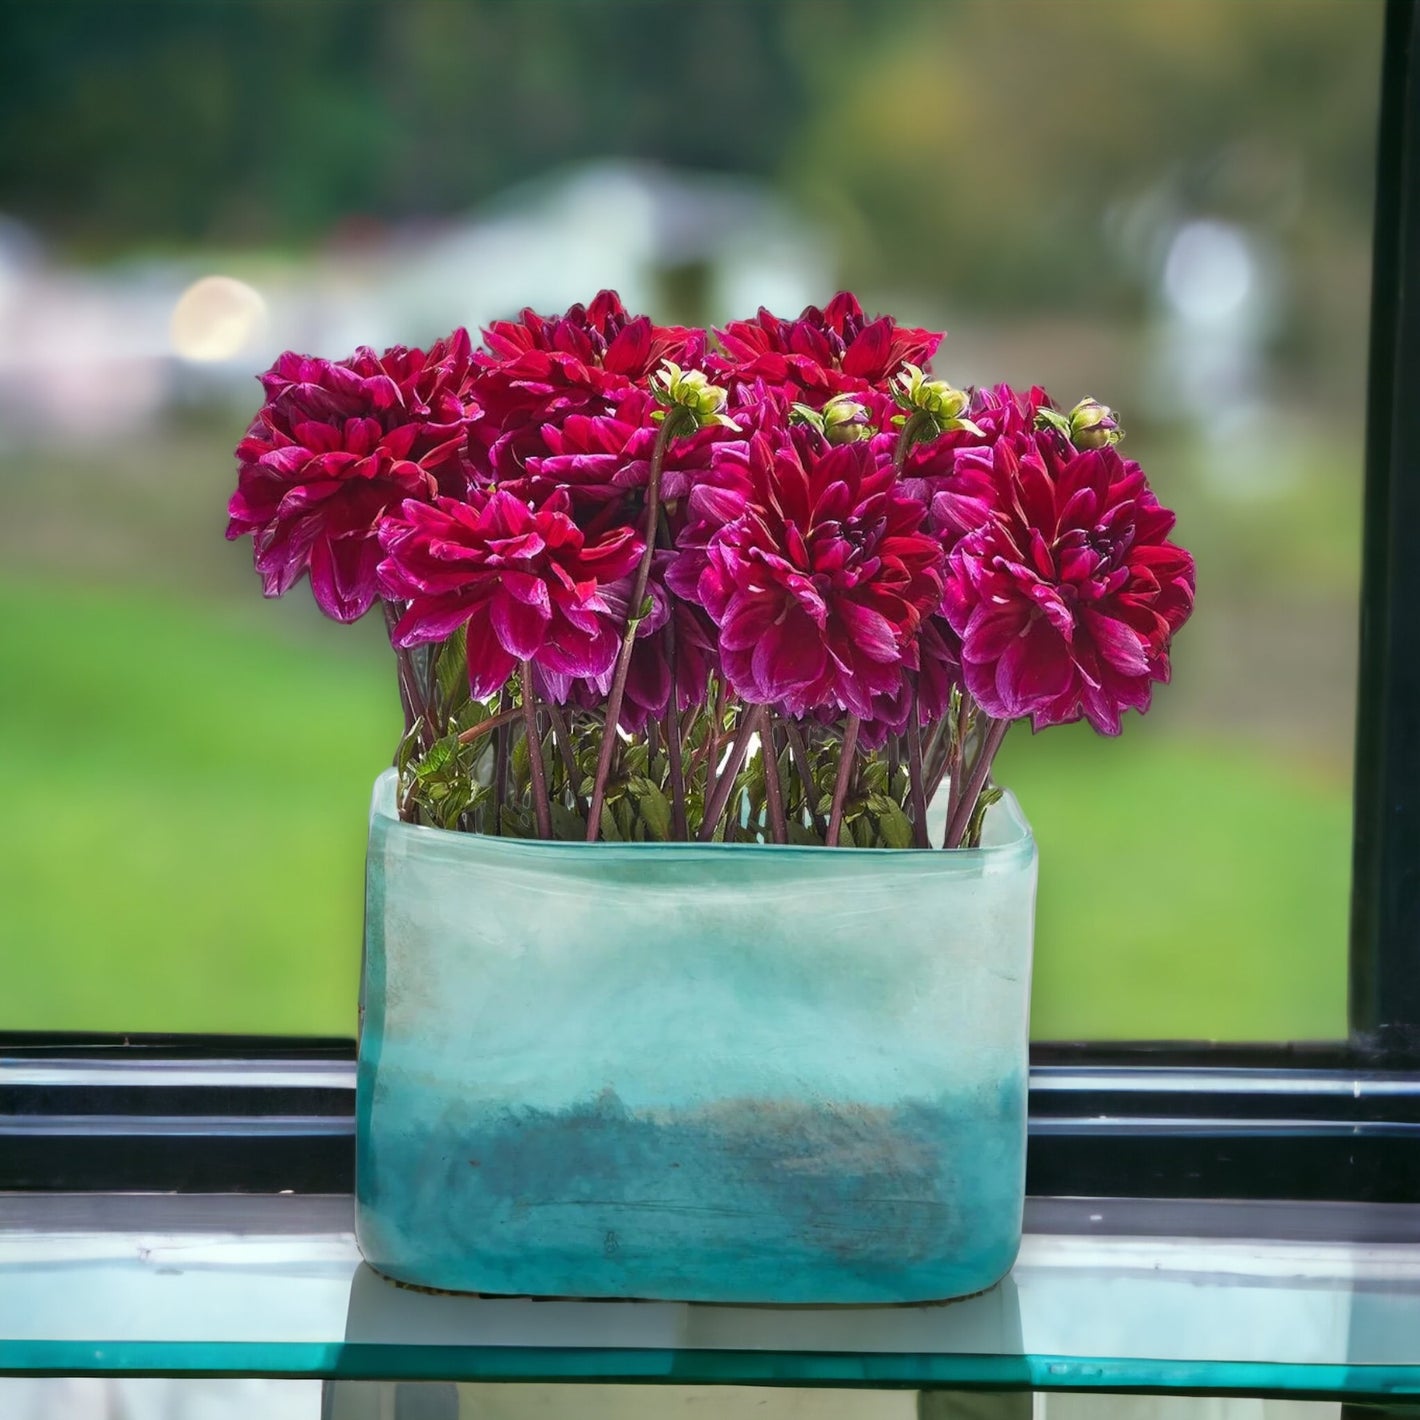 green and blue sea glass vase with dark pink flowers in it on a windowsill